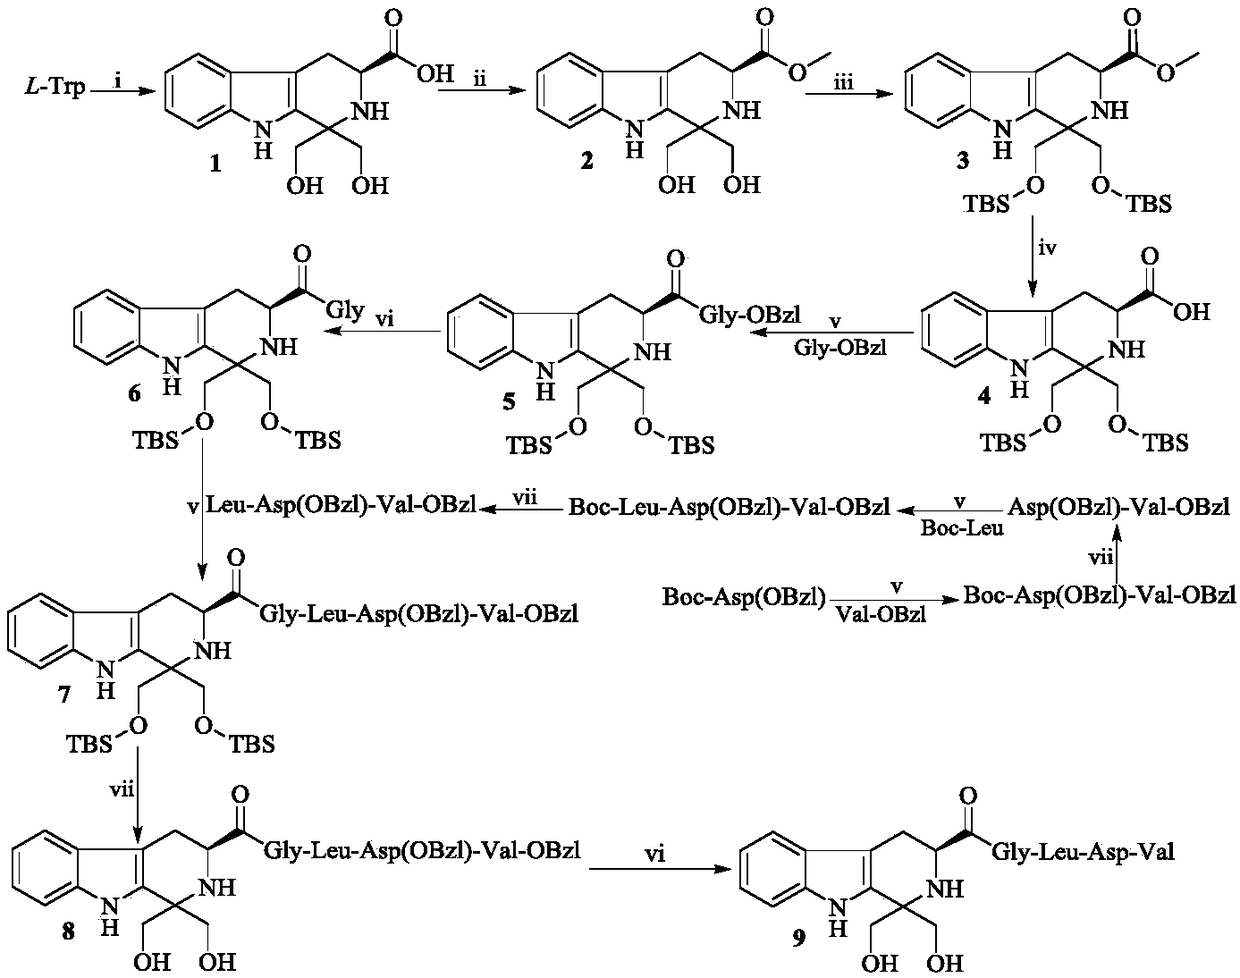 1,1-dimethylol-tetrahydro-beta-carboline-3-formyl-GLDV, synthesis, activities and applications thereof